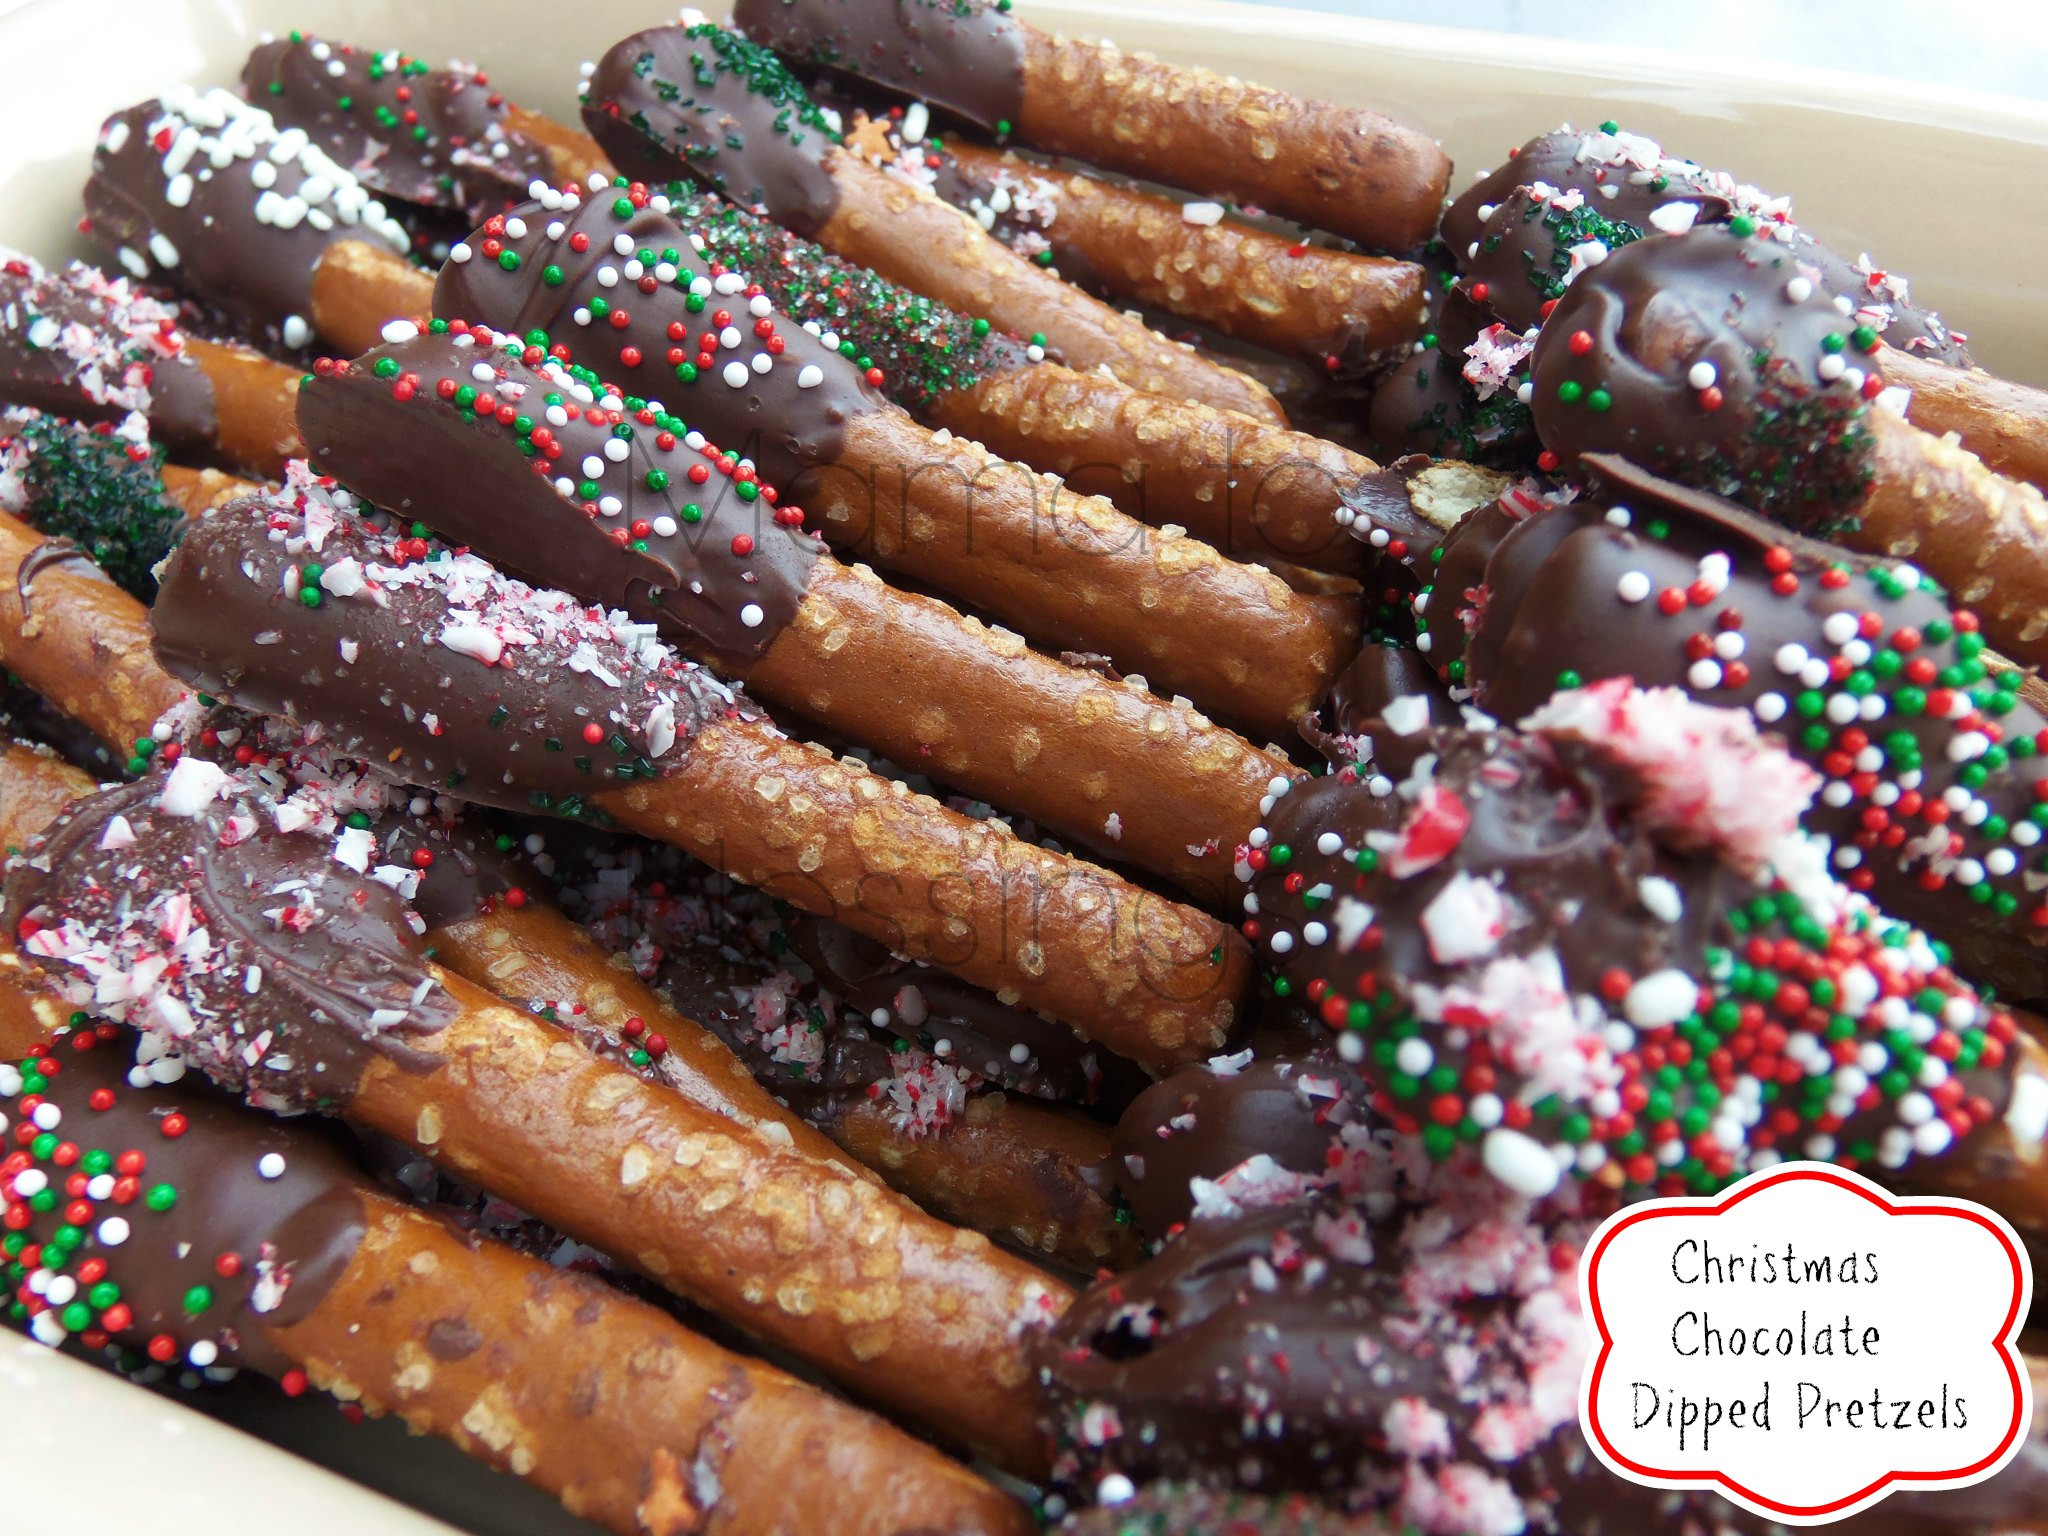 Christmas Chocolate Dipped Pretzels
 Chocolate Dipped Pretzels Recipe Mama to 6 Blessings